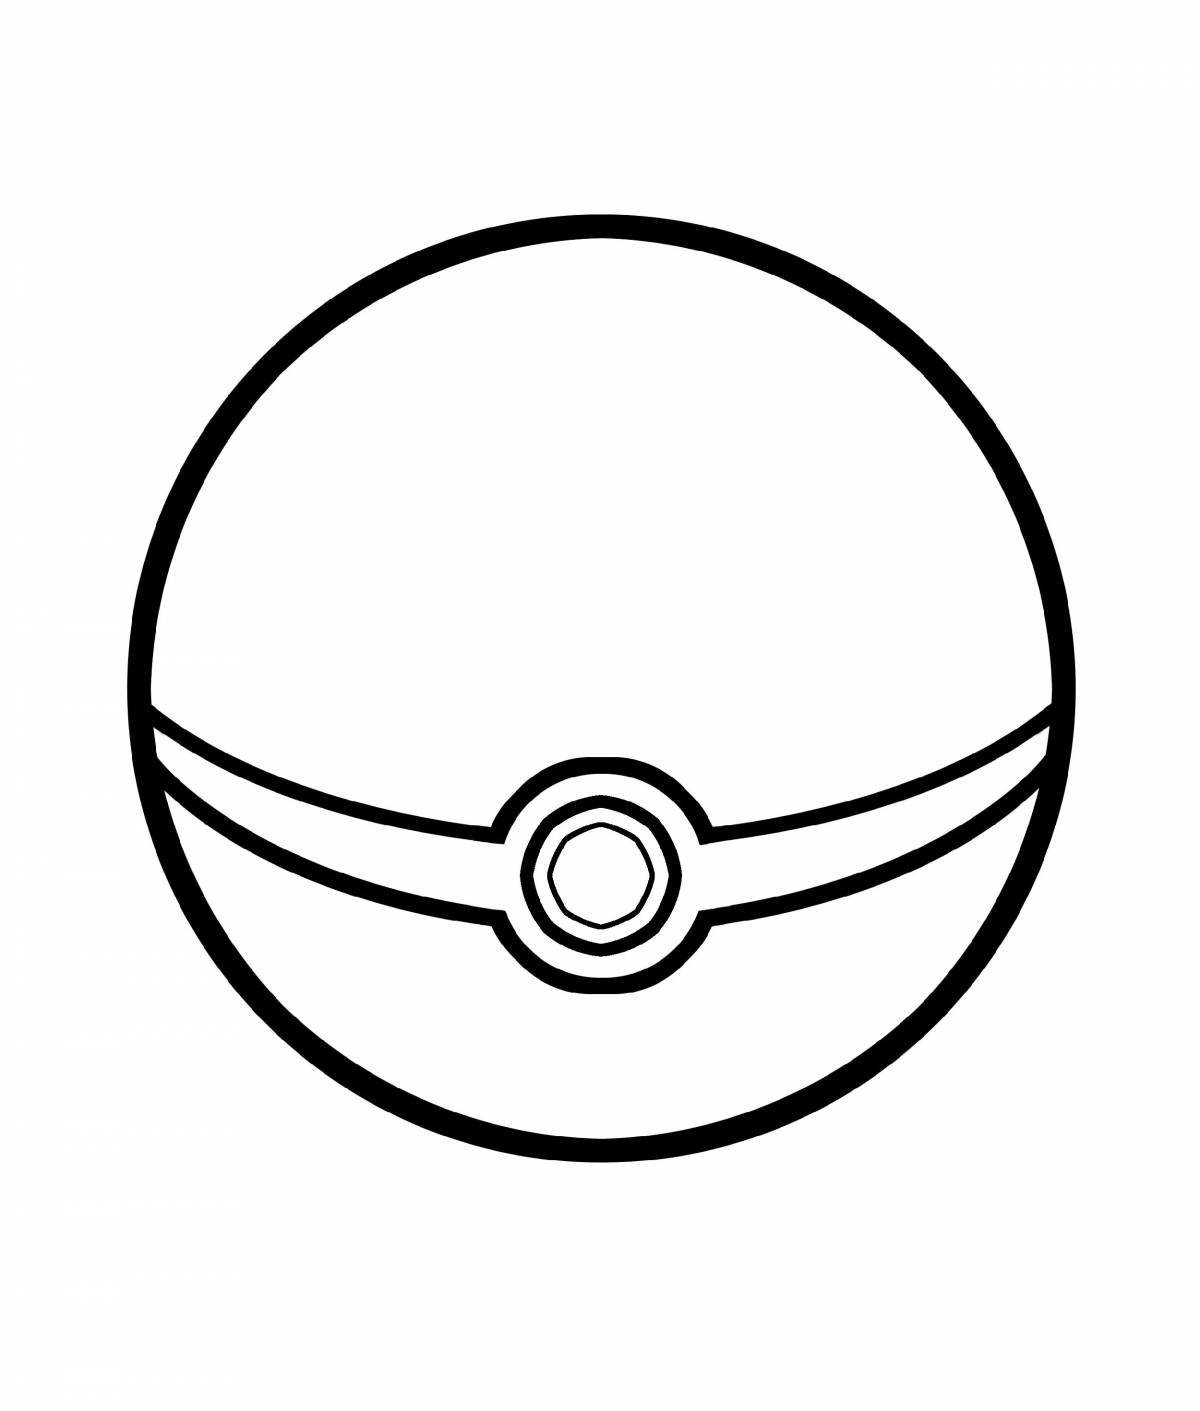 Exciting pikachu and pokeball coloring book